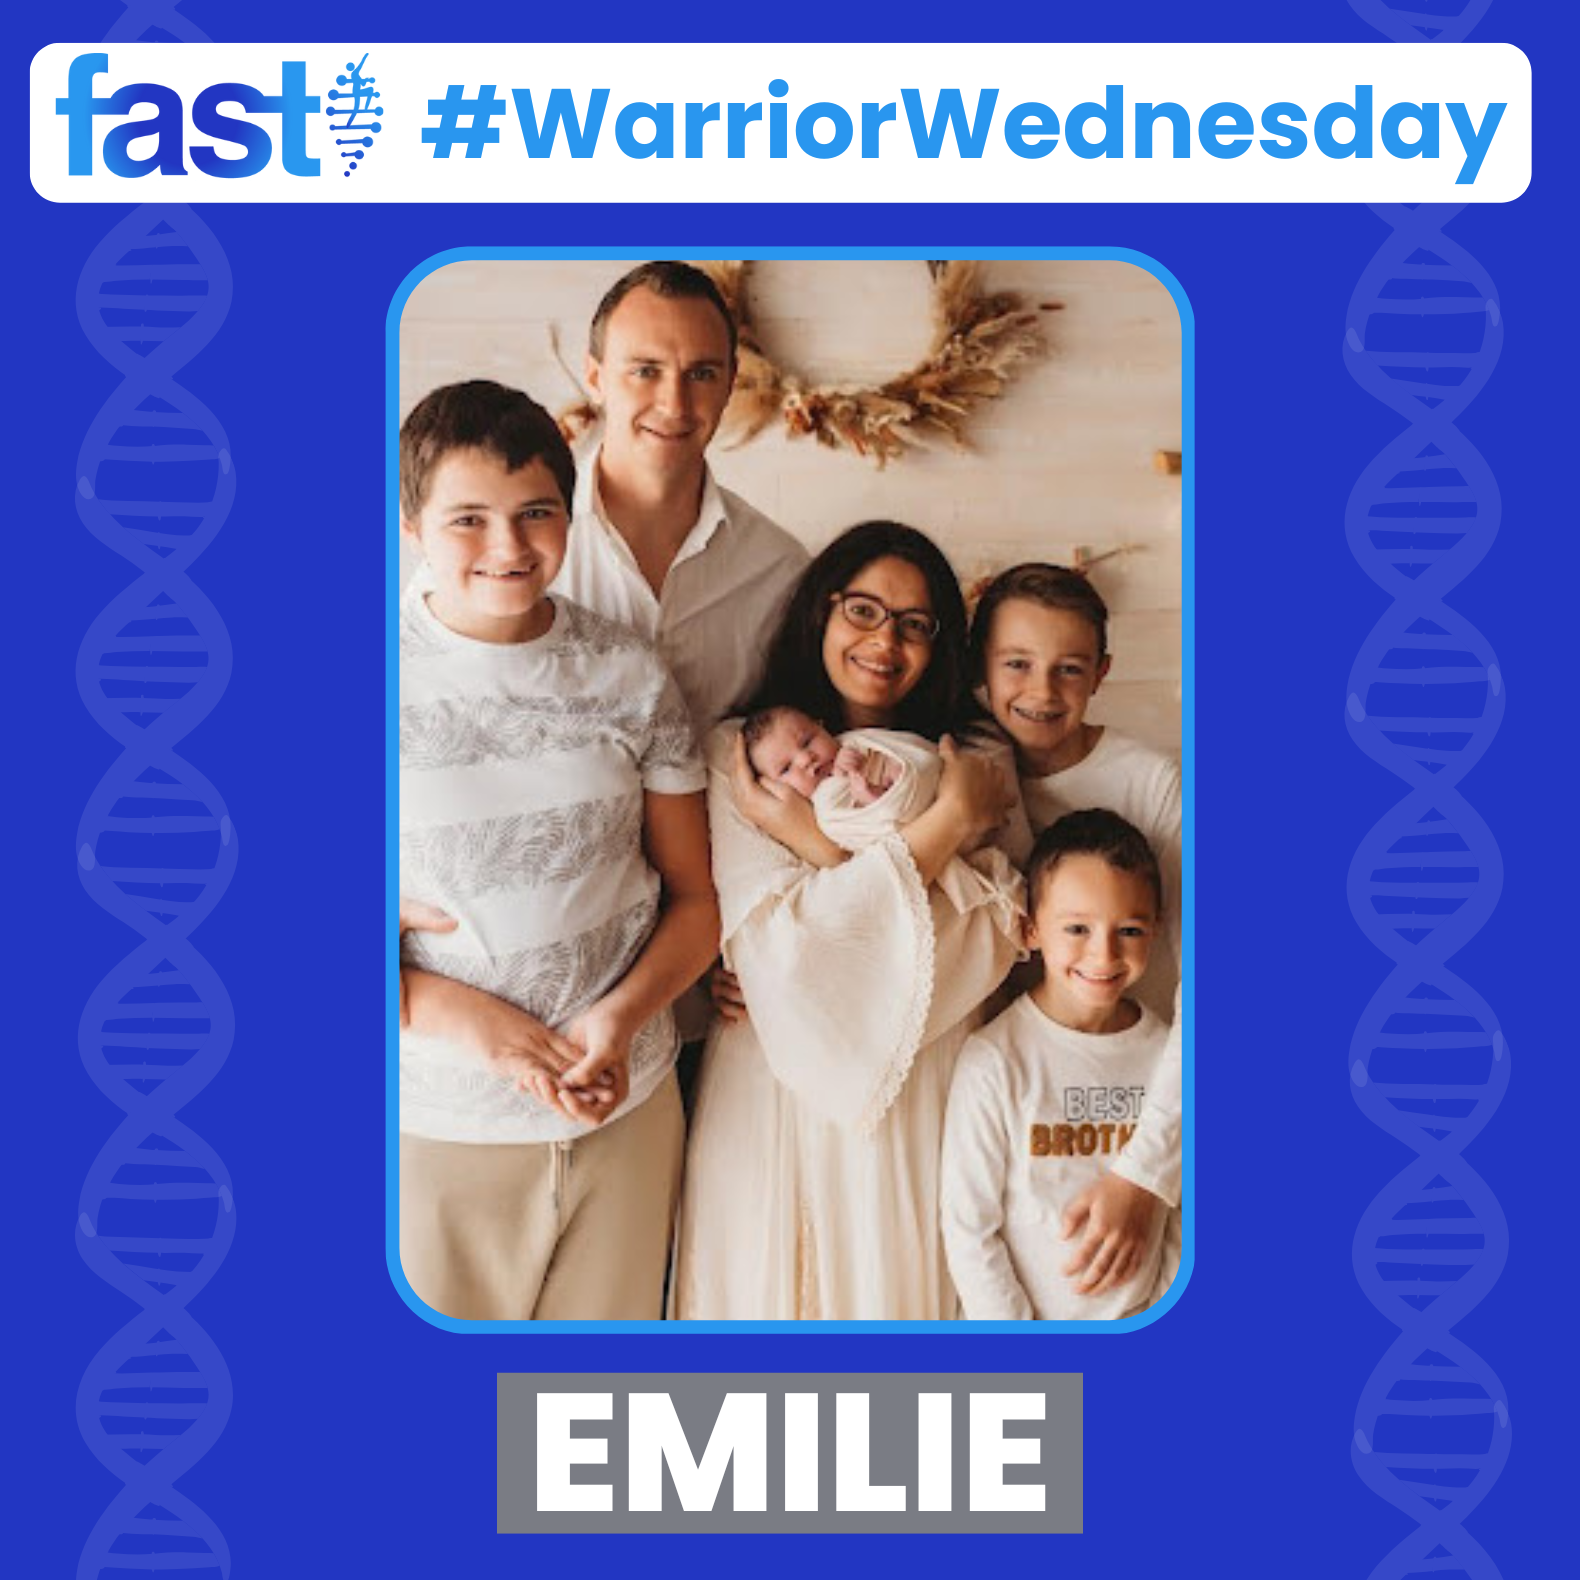 FAST #WarriorWednesday: Emilie, with a photo of Emilie, Fred, and their four children posing together